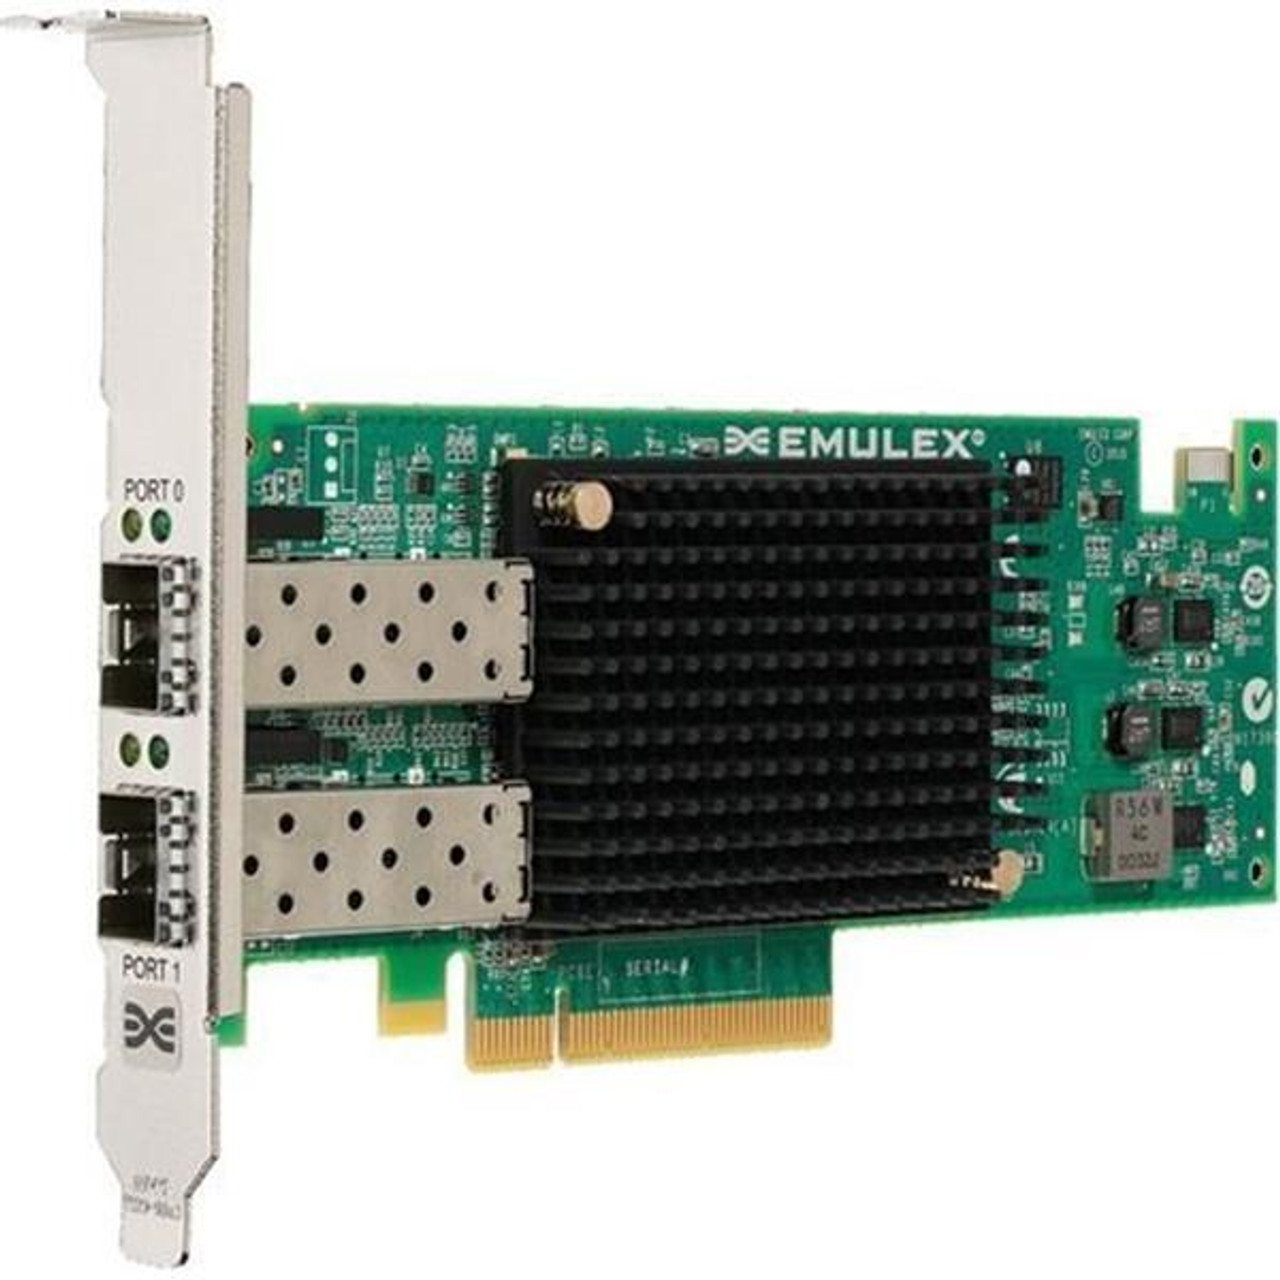 OCE11102-FM Emulex Network OneConnect 2-Ports 10Gbps PCI Express x8 FCoE Converged Network Adapter